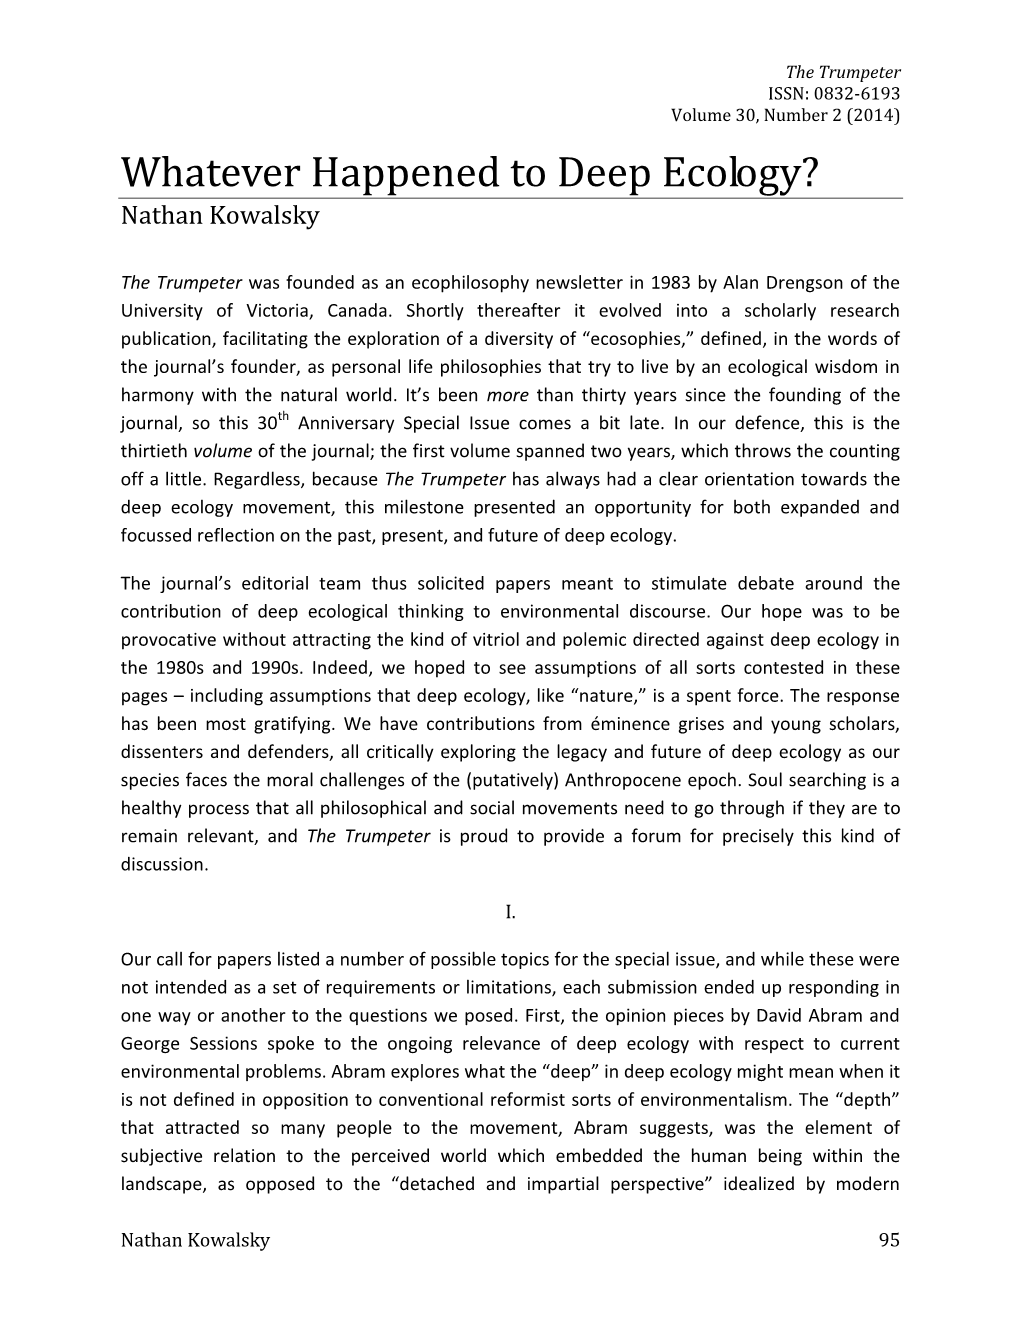 Whatever Happened to Deep Ecology? Nathan Kowalsky